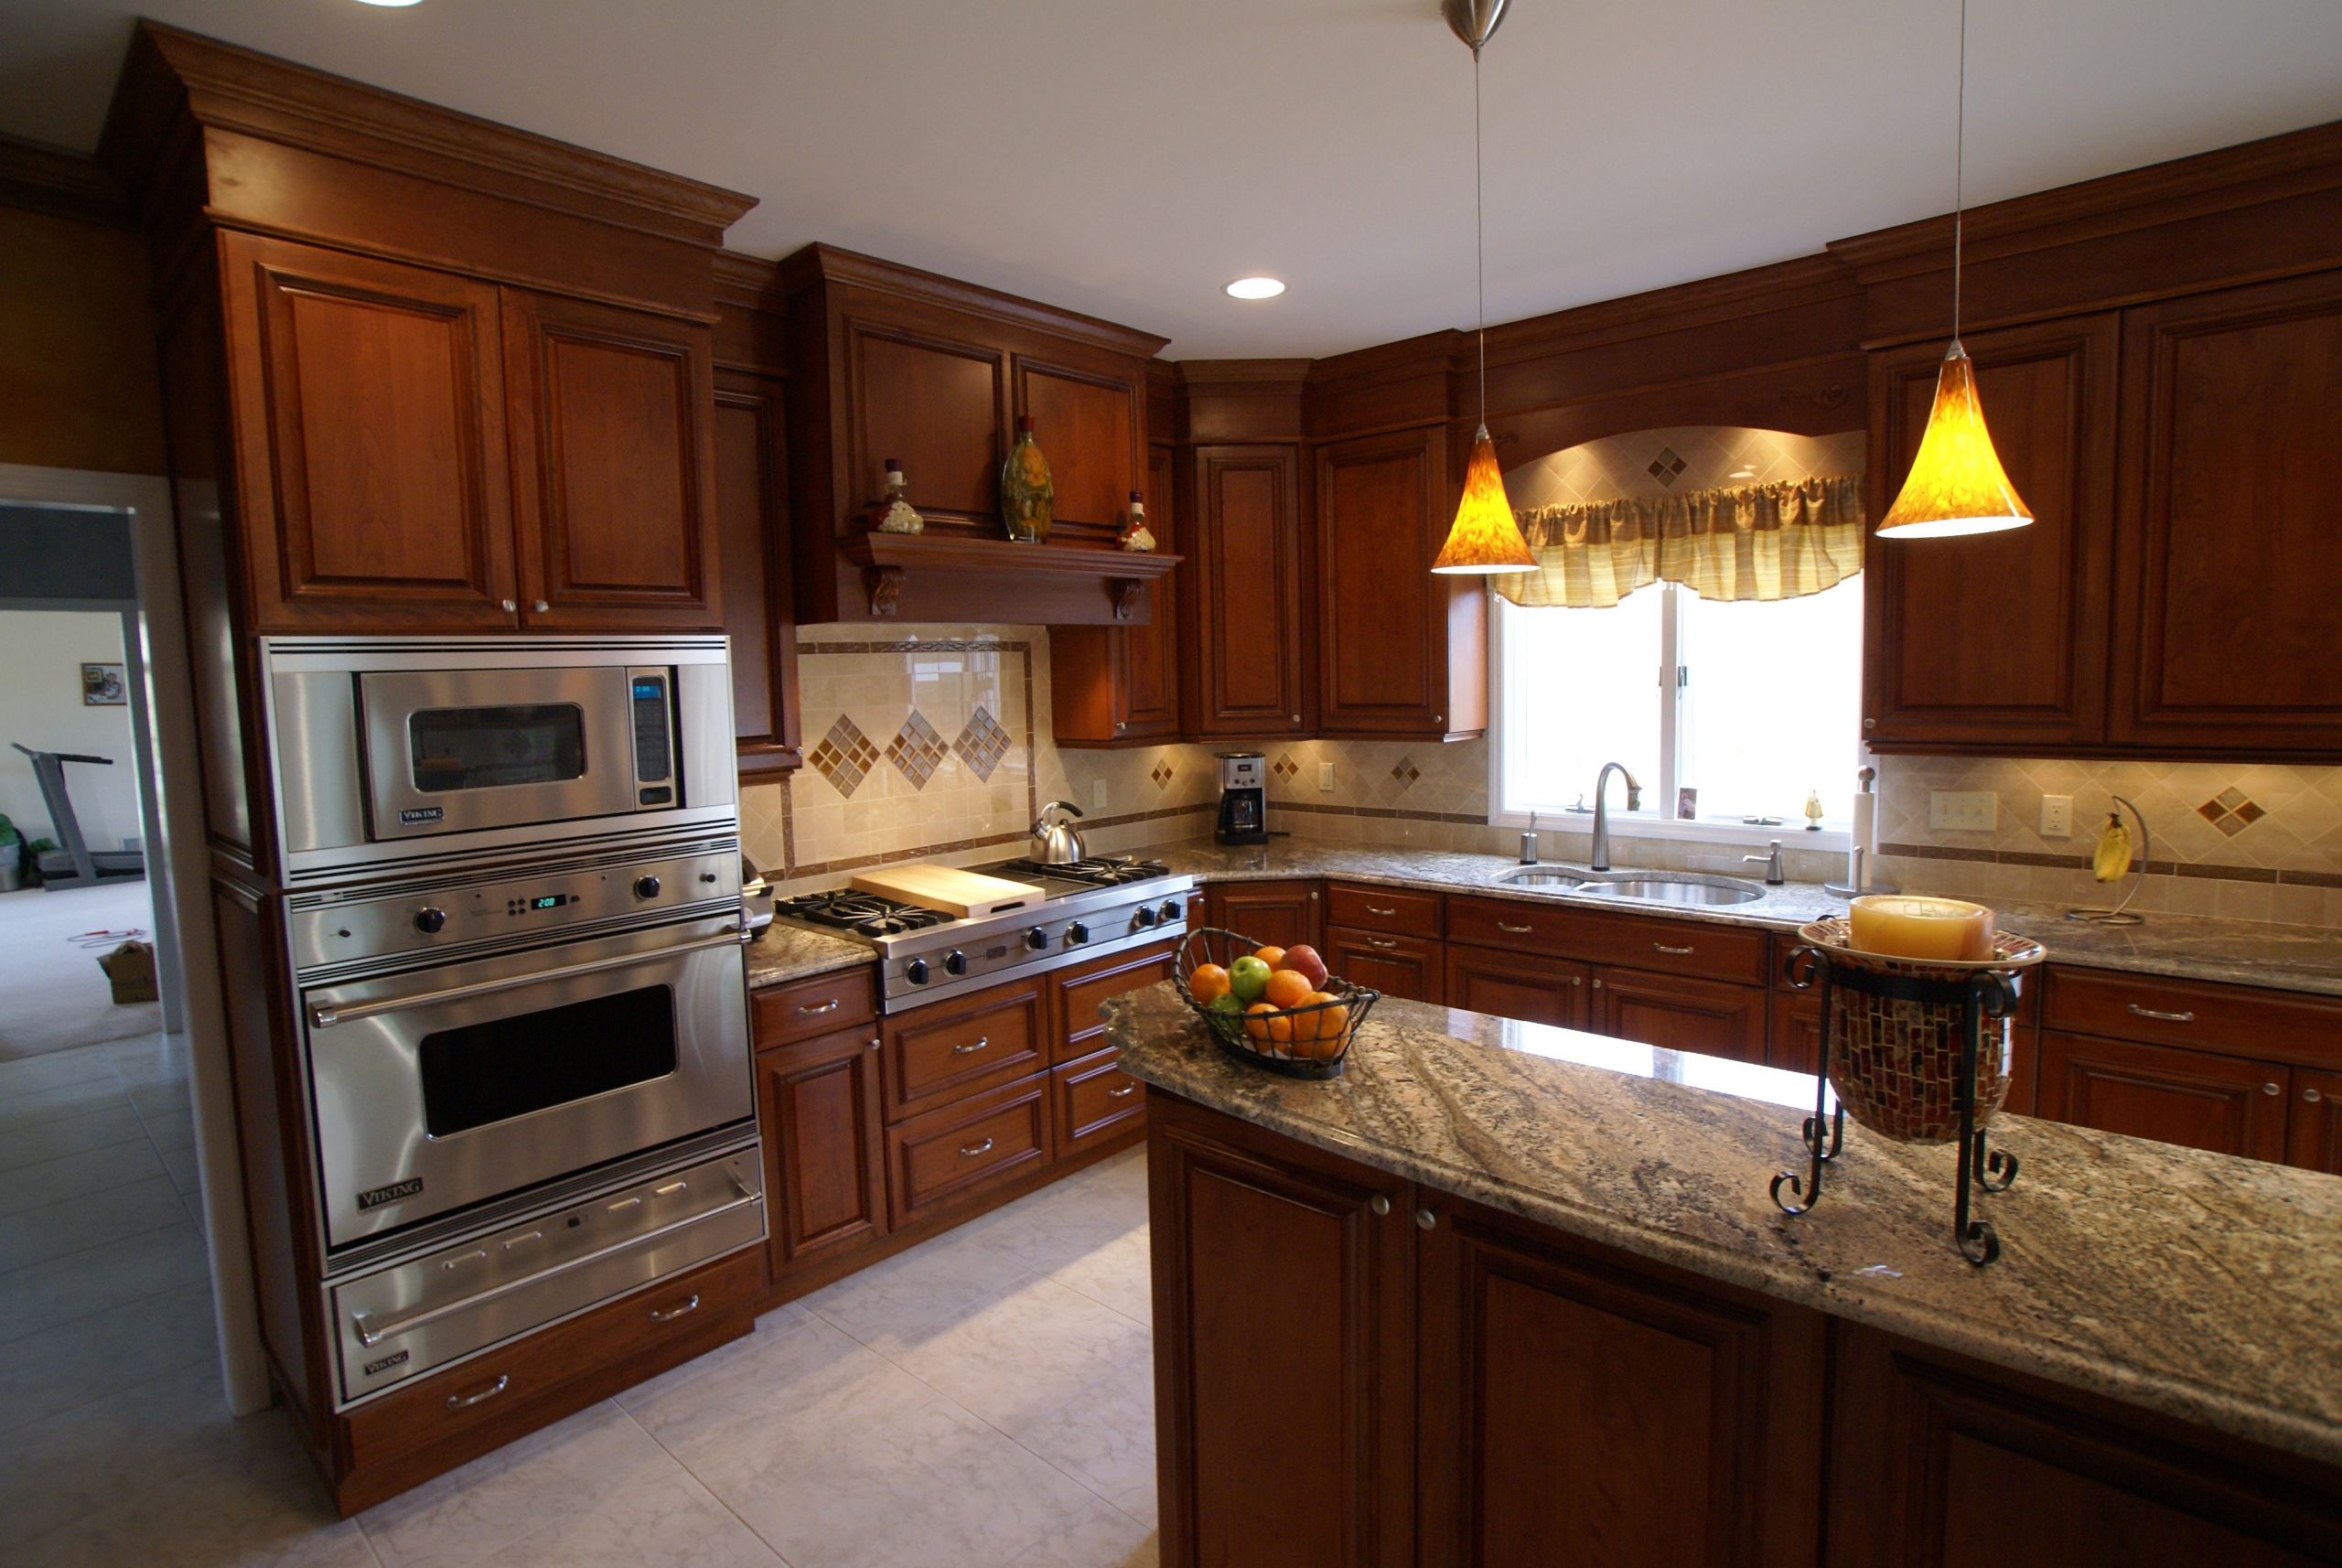 Kitchen Remodel Ideas Images
 Monmouth County Kitchen Remodeling Ideas to Inspire You